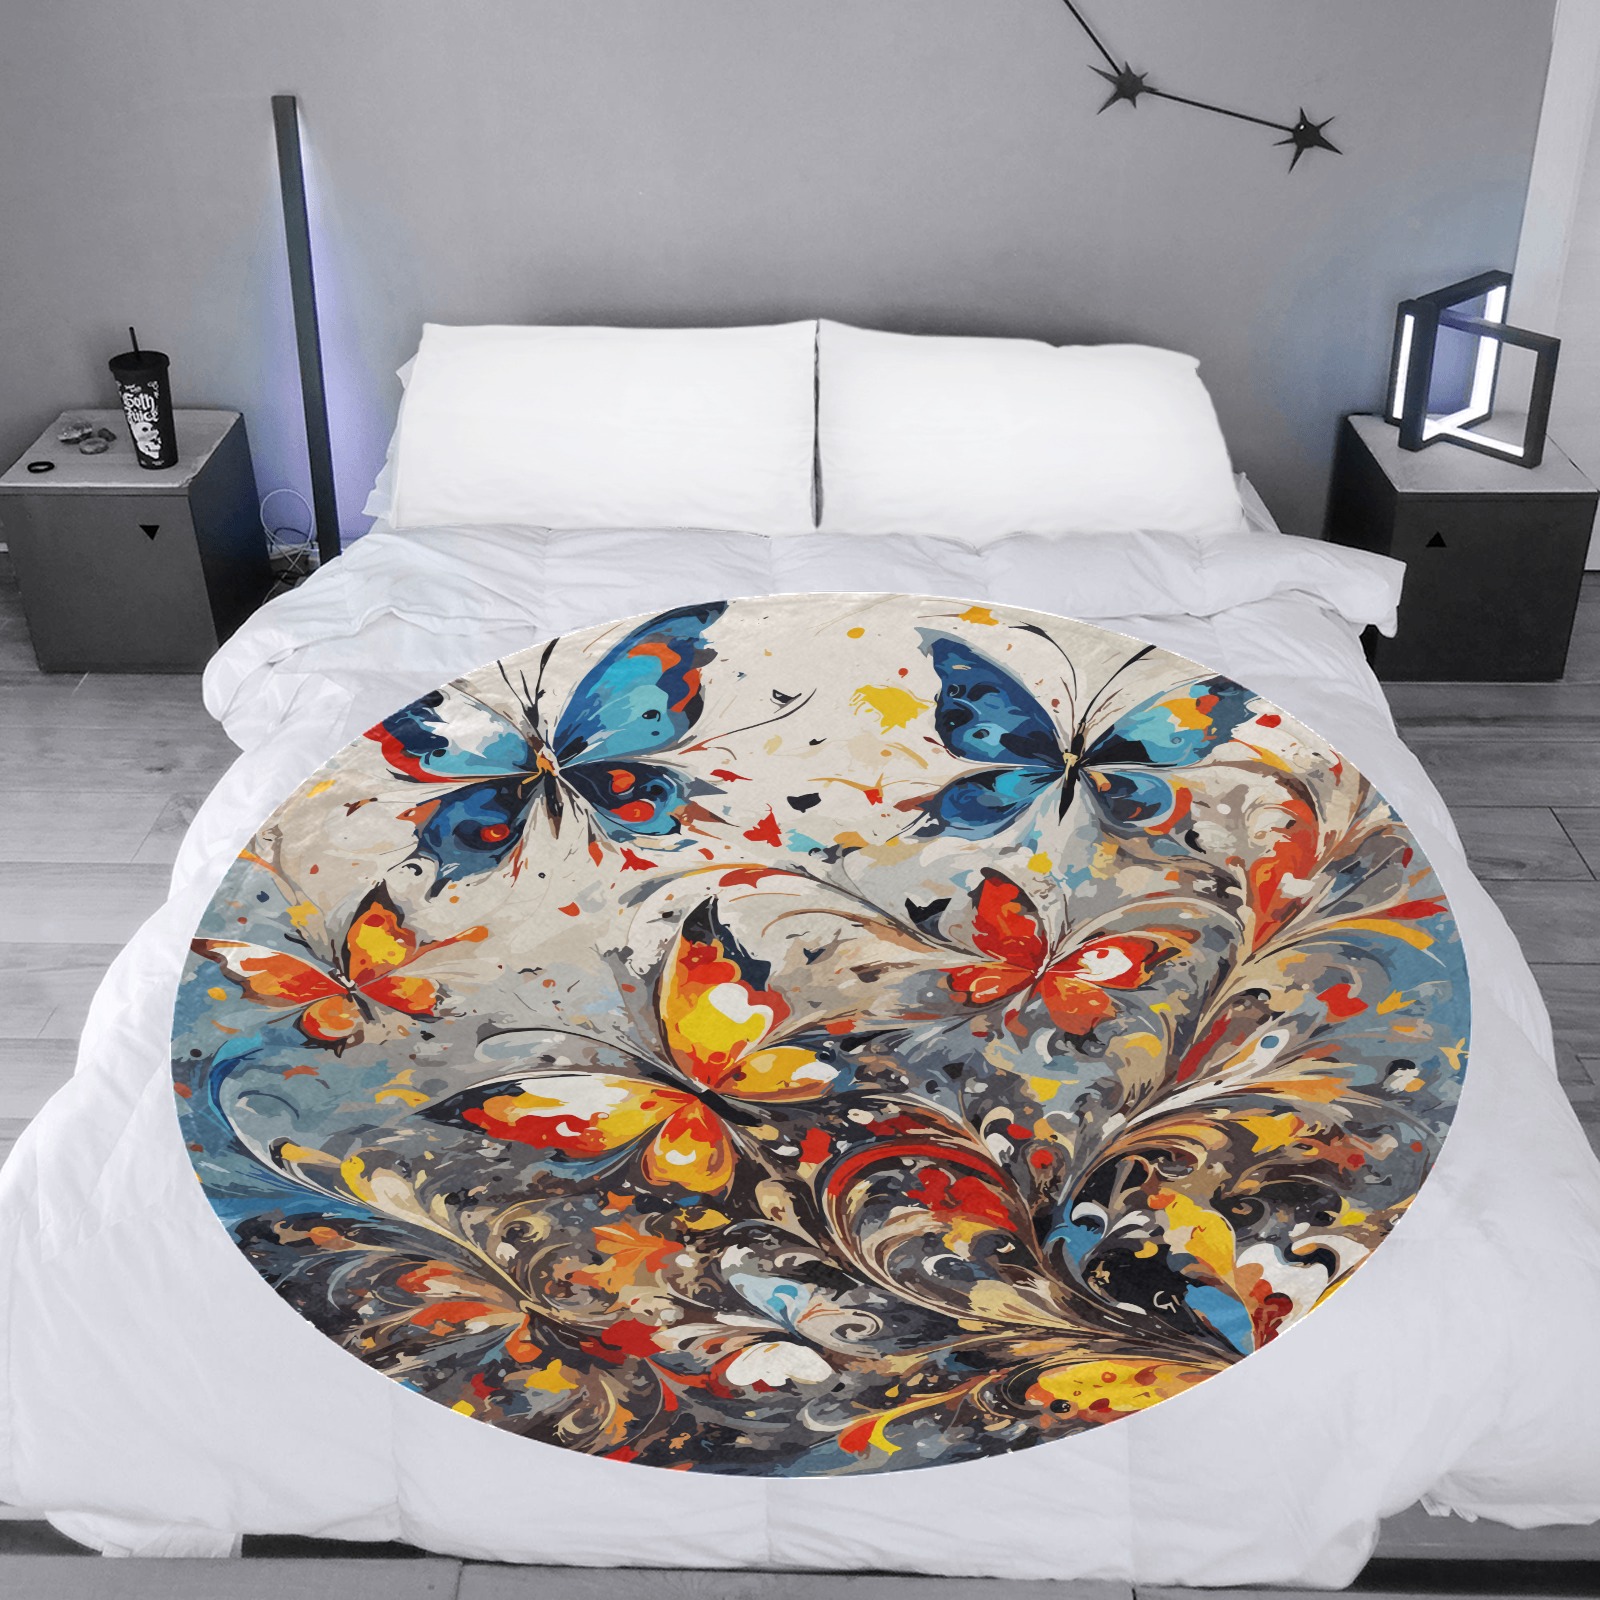 Decorative floral ornament and awesome butterflies Circular Ultra-Soft Micro Fleece Blanket 60"